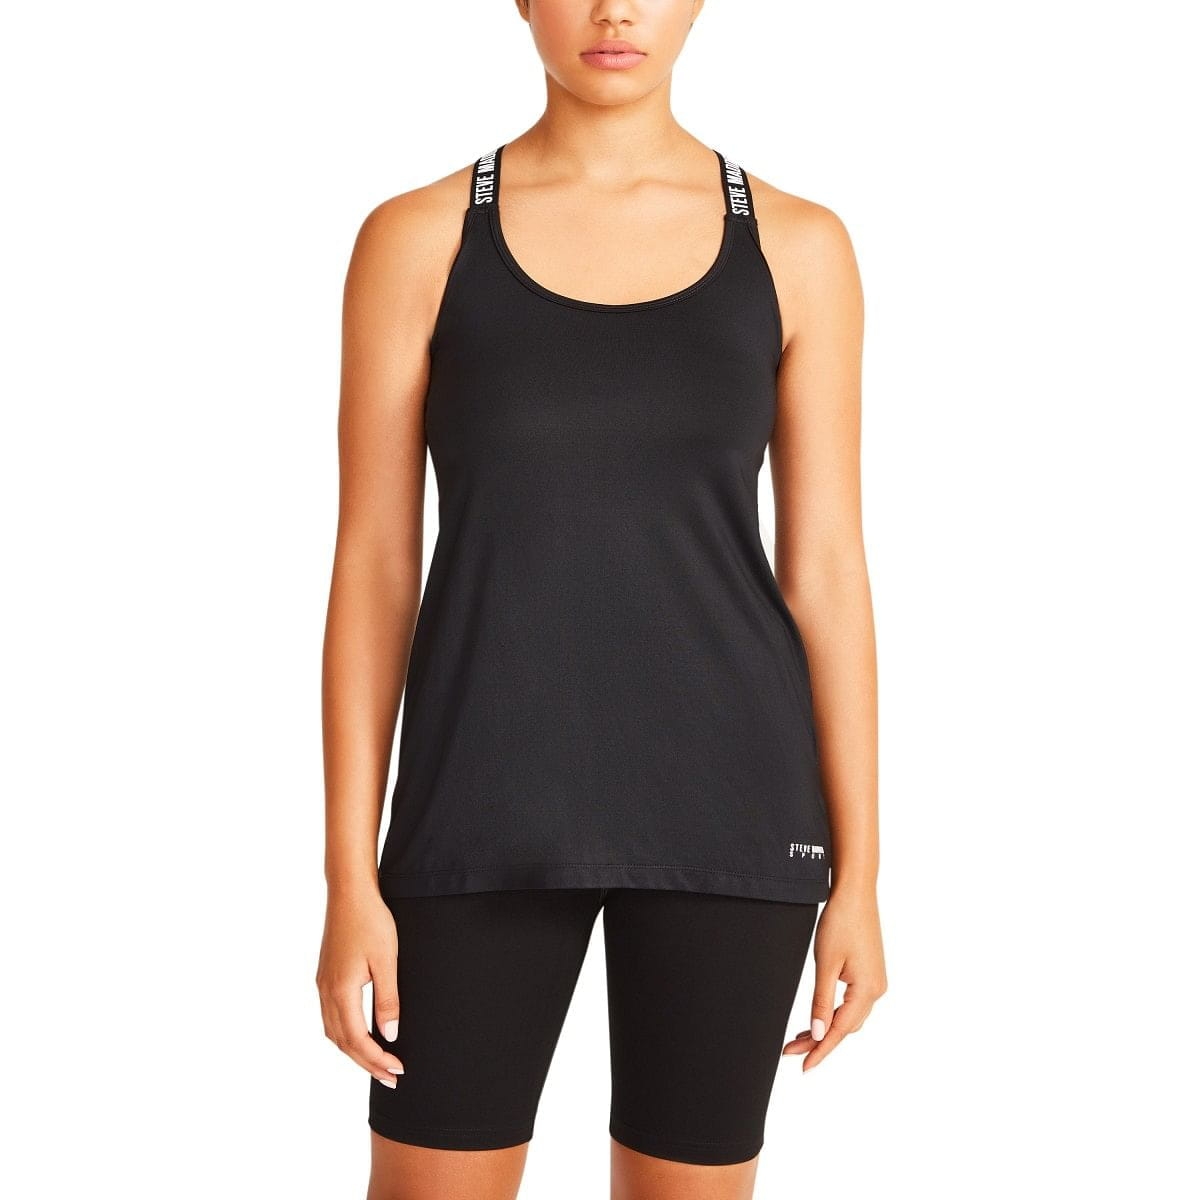 Women's Blue Polyester Solid Activewear Top